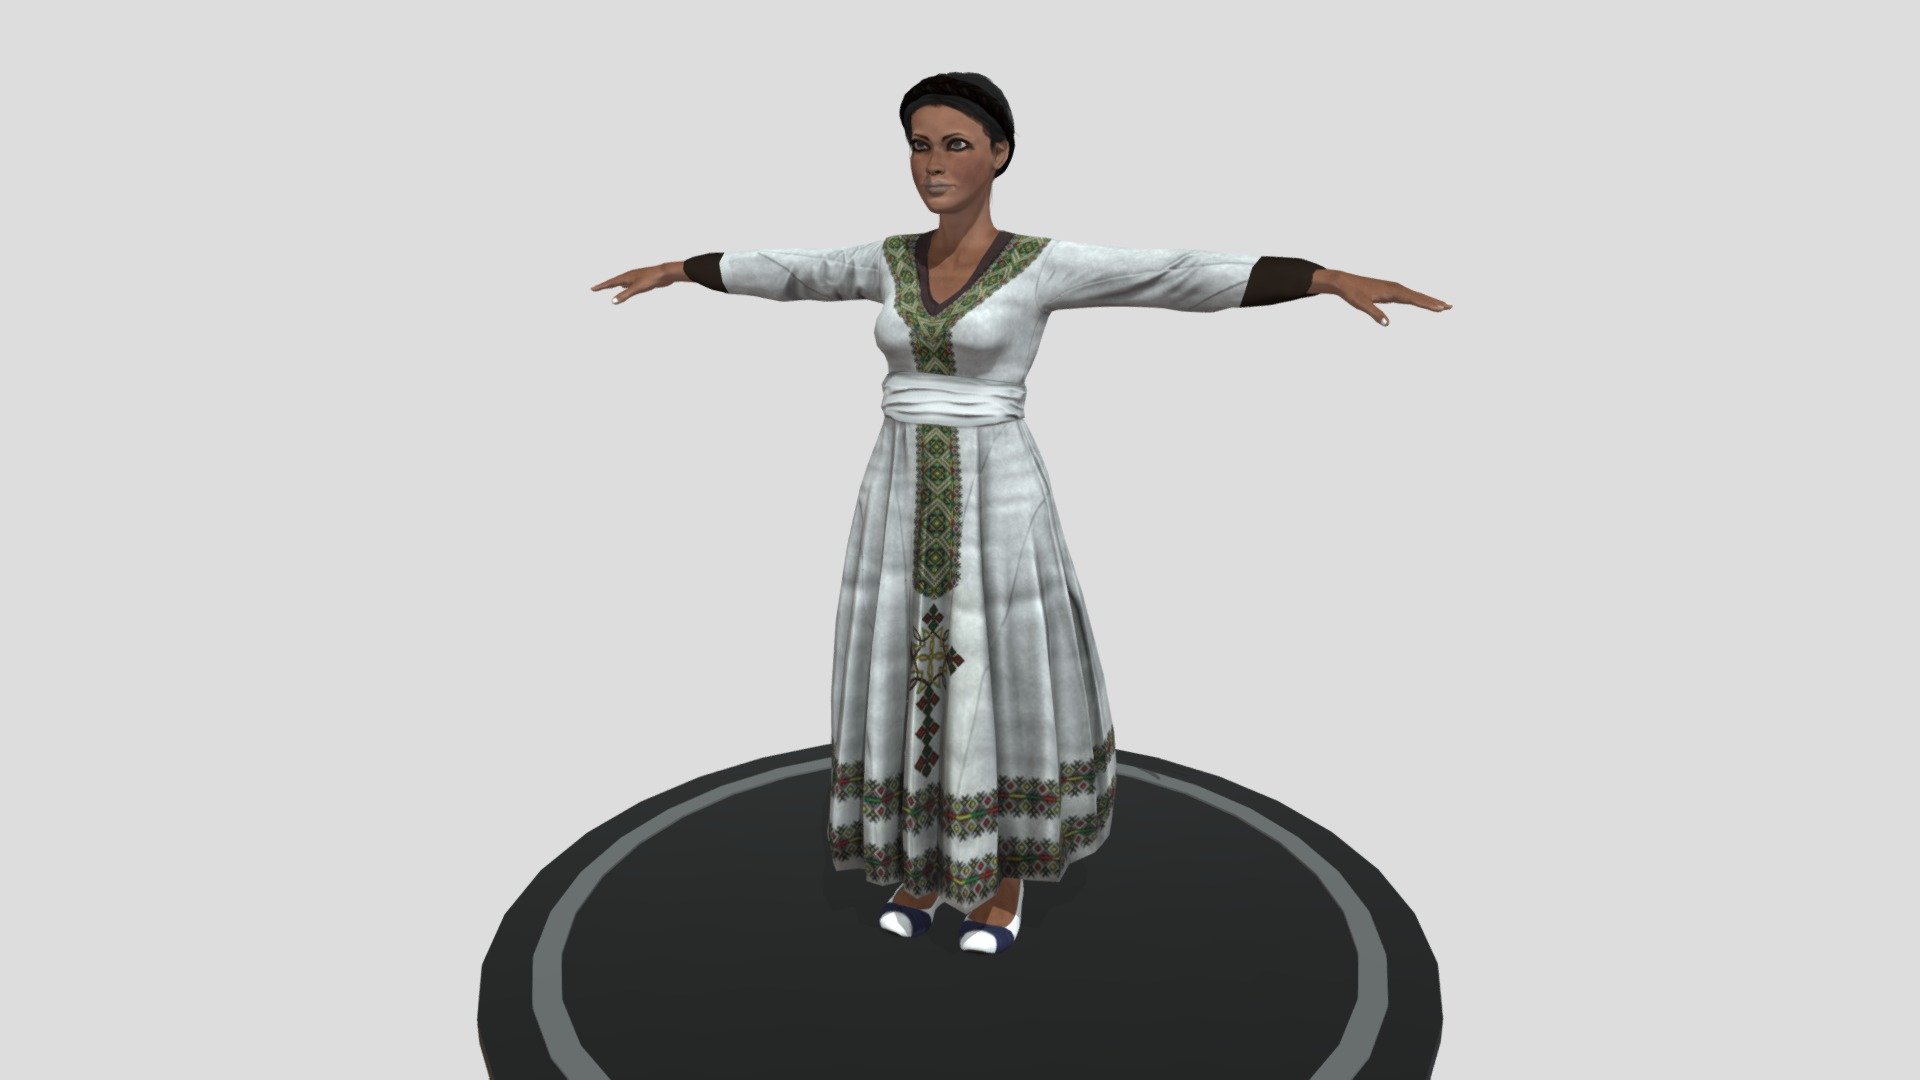 Ethiopian woman wearing long cultural cloth
Game Ready, for graphics, animation, and films - Ethiopian woman wearing long cultural cloth - 3D model by wondiealexio 3d model